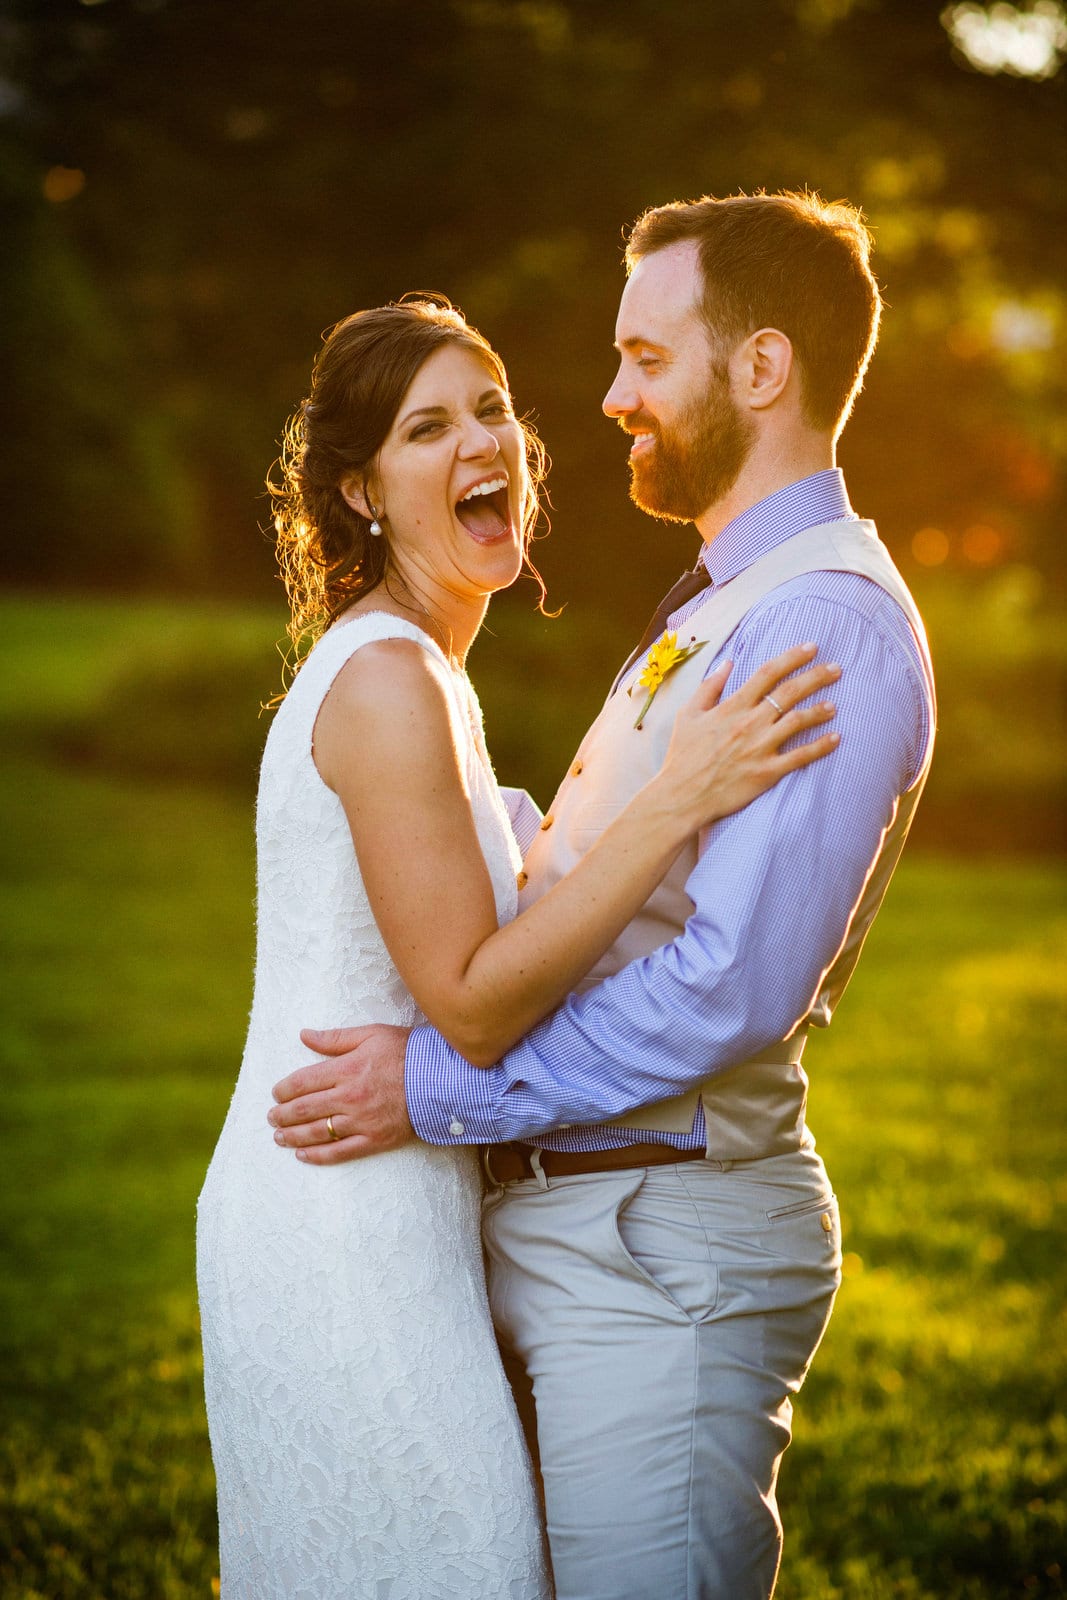 A bride laughs as she and her groom stand in the late afternoon sun after their wedding at Armstrong Farms.